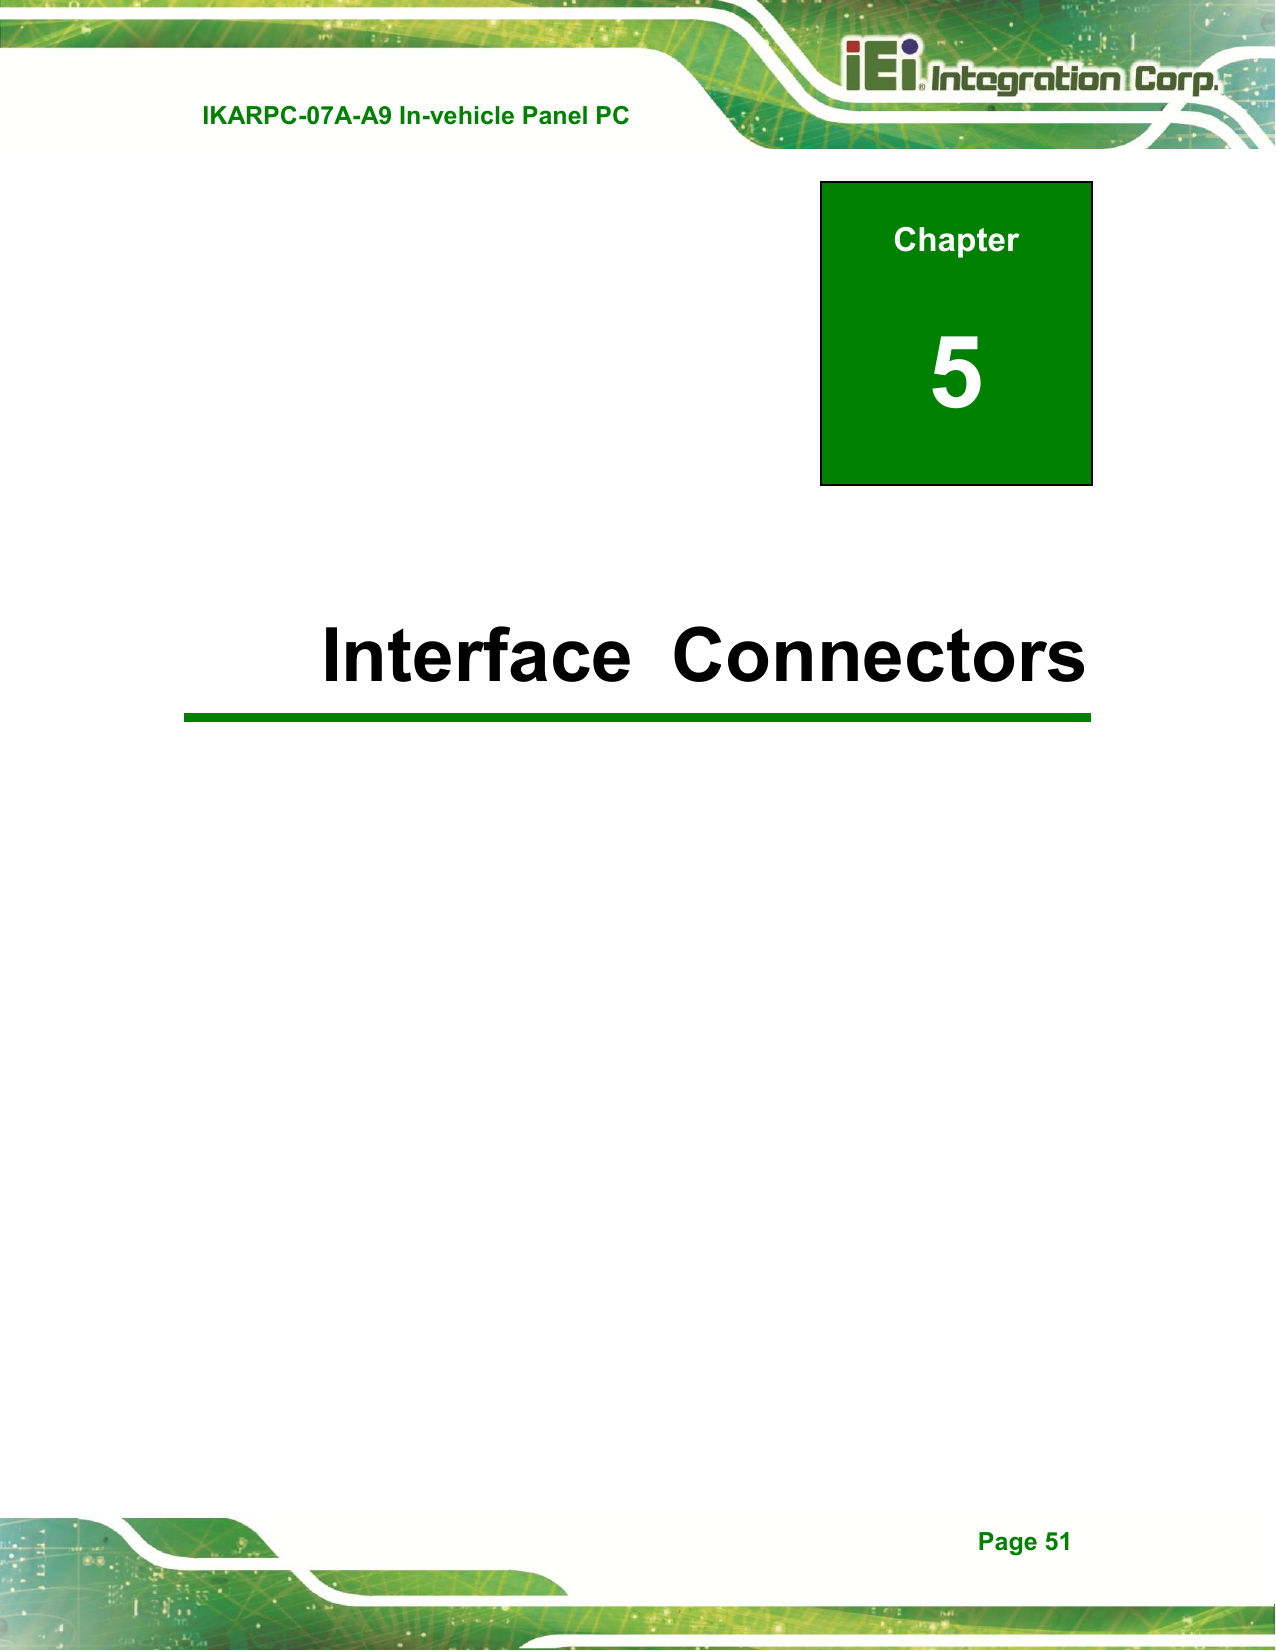   IKARPC-07A-A9 In-vehicle Panel PC  Page 51 Chapter 5  5 Interface  Connectors 